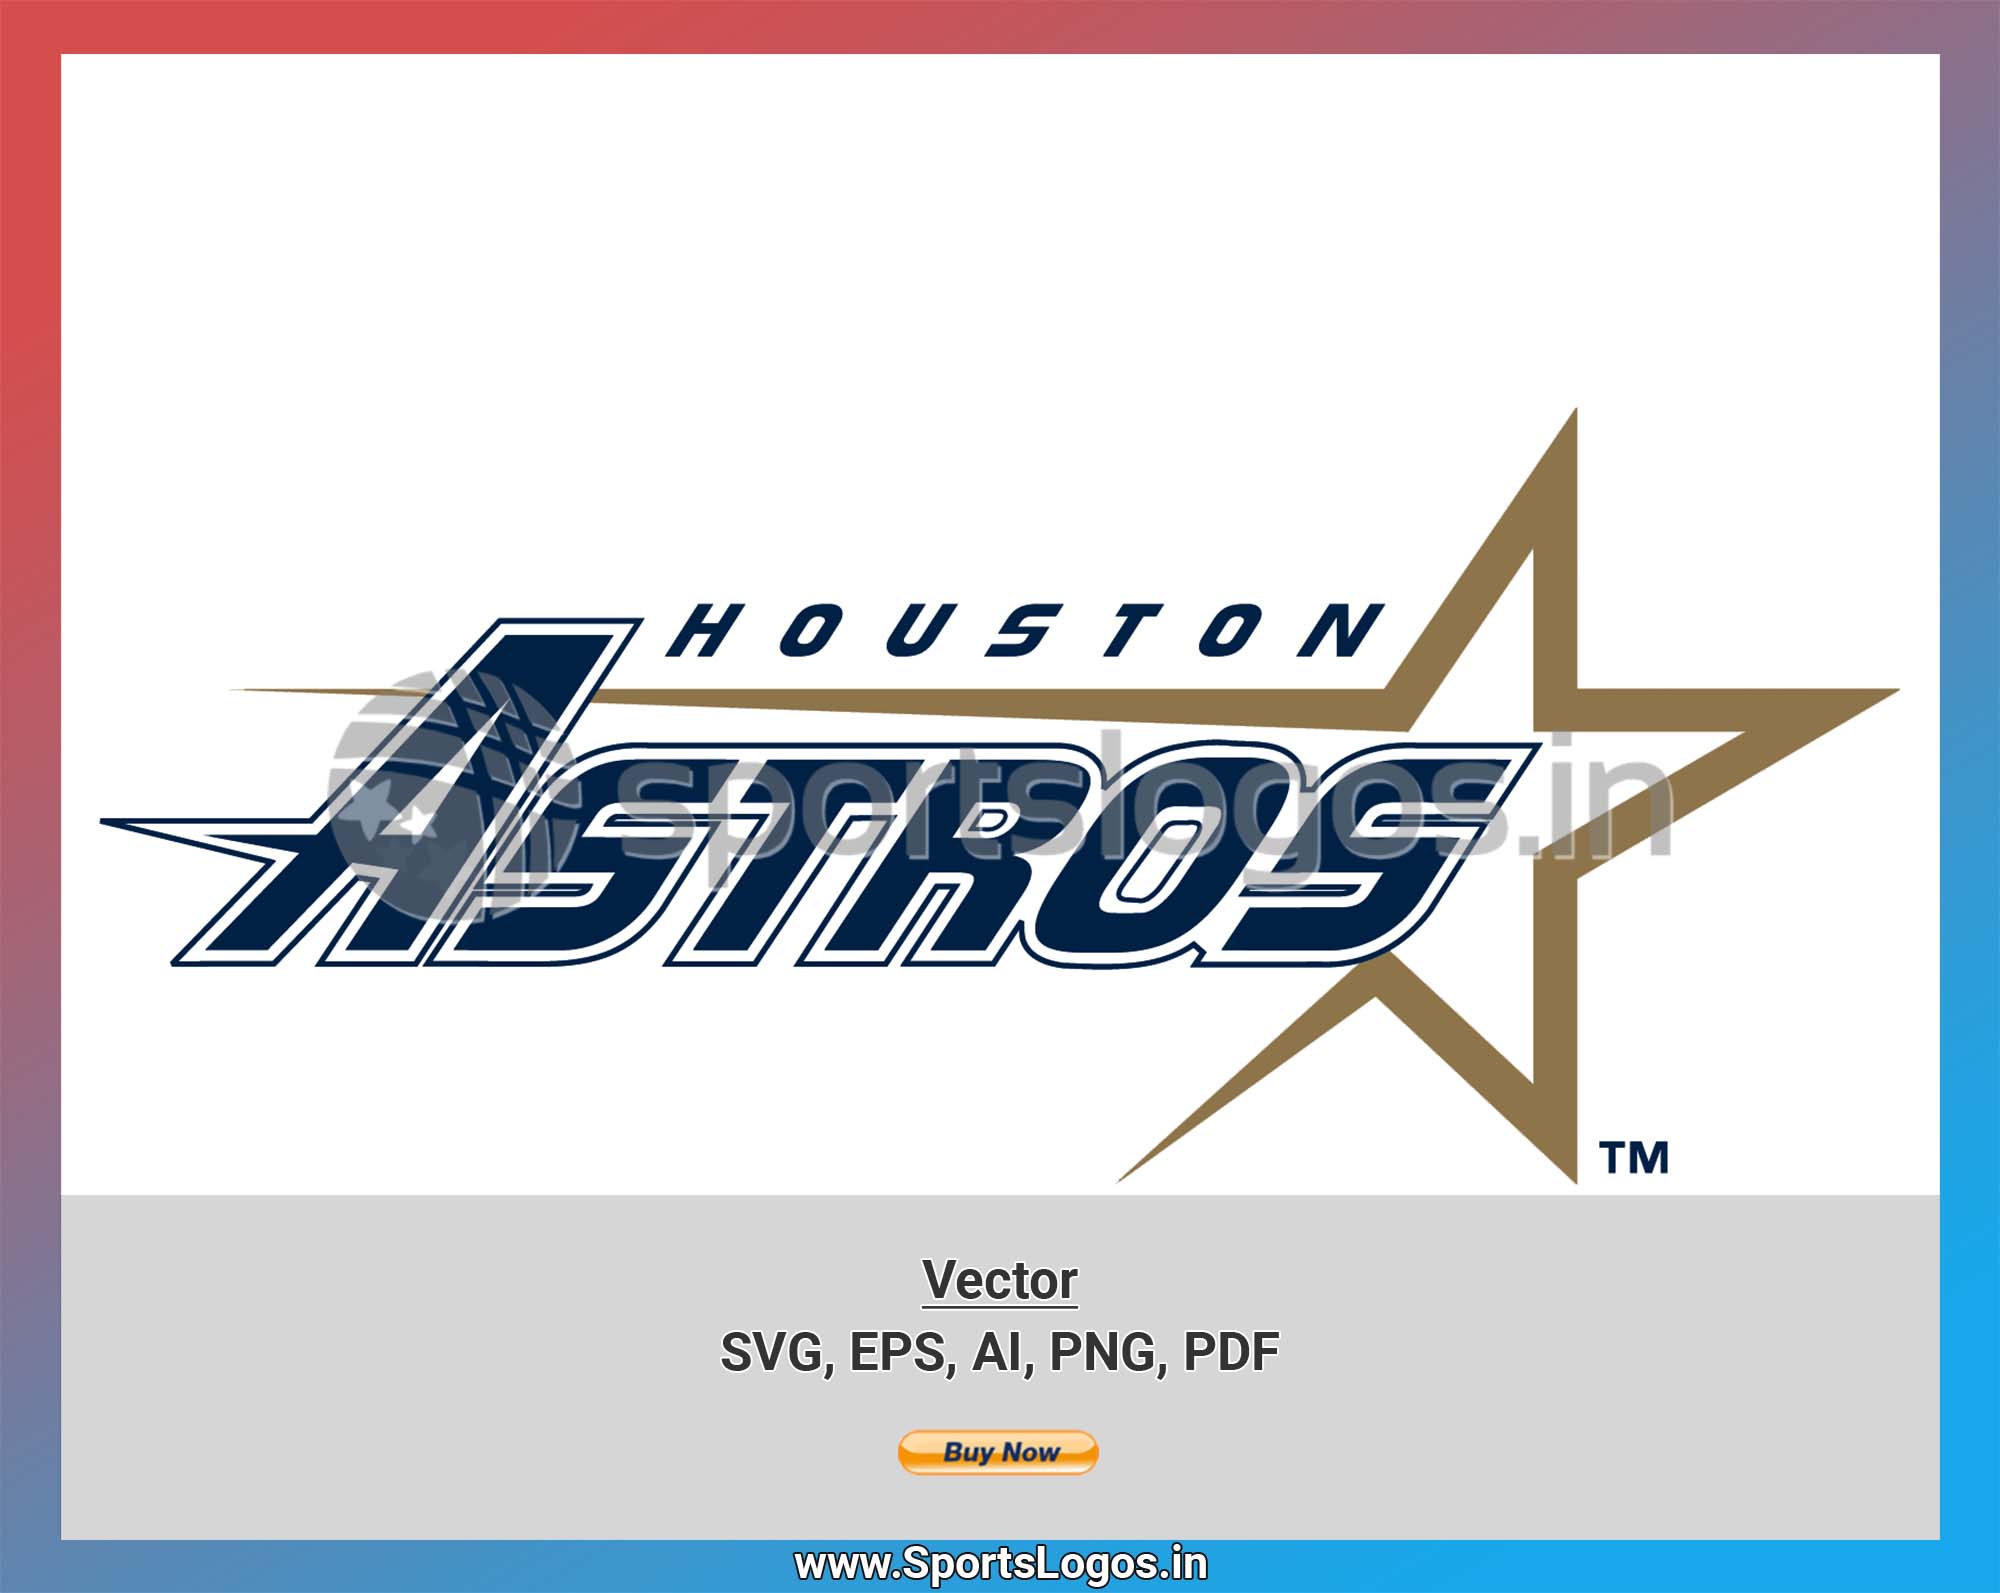 Houston Astros - Baseball Sports Vector SVG Logo in 5 formats - SPLN001887  • Sports Logos - Embroidery & Vector for NFL, NBA, NHL, MLB, MiLB, and more!